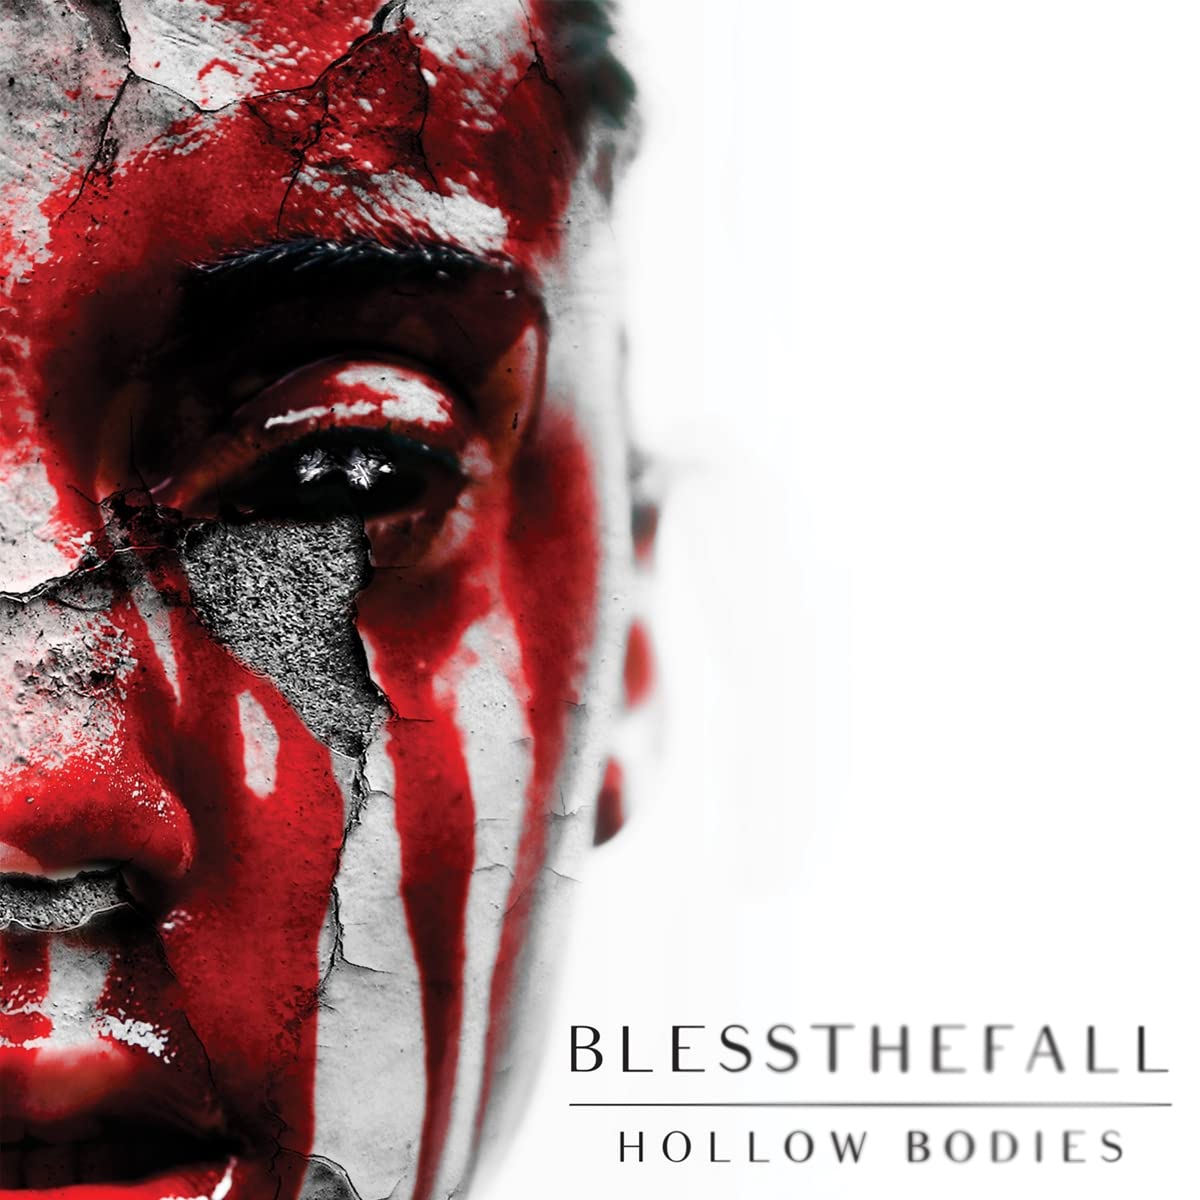 Blessthefall- Hollow Bodies